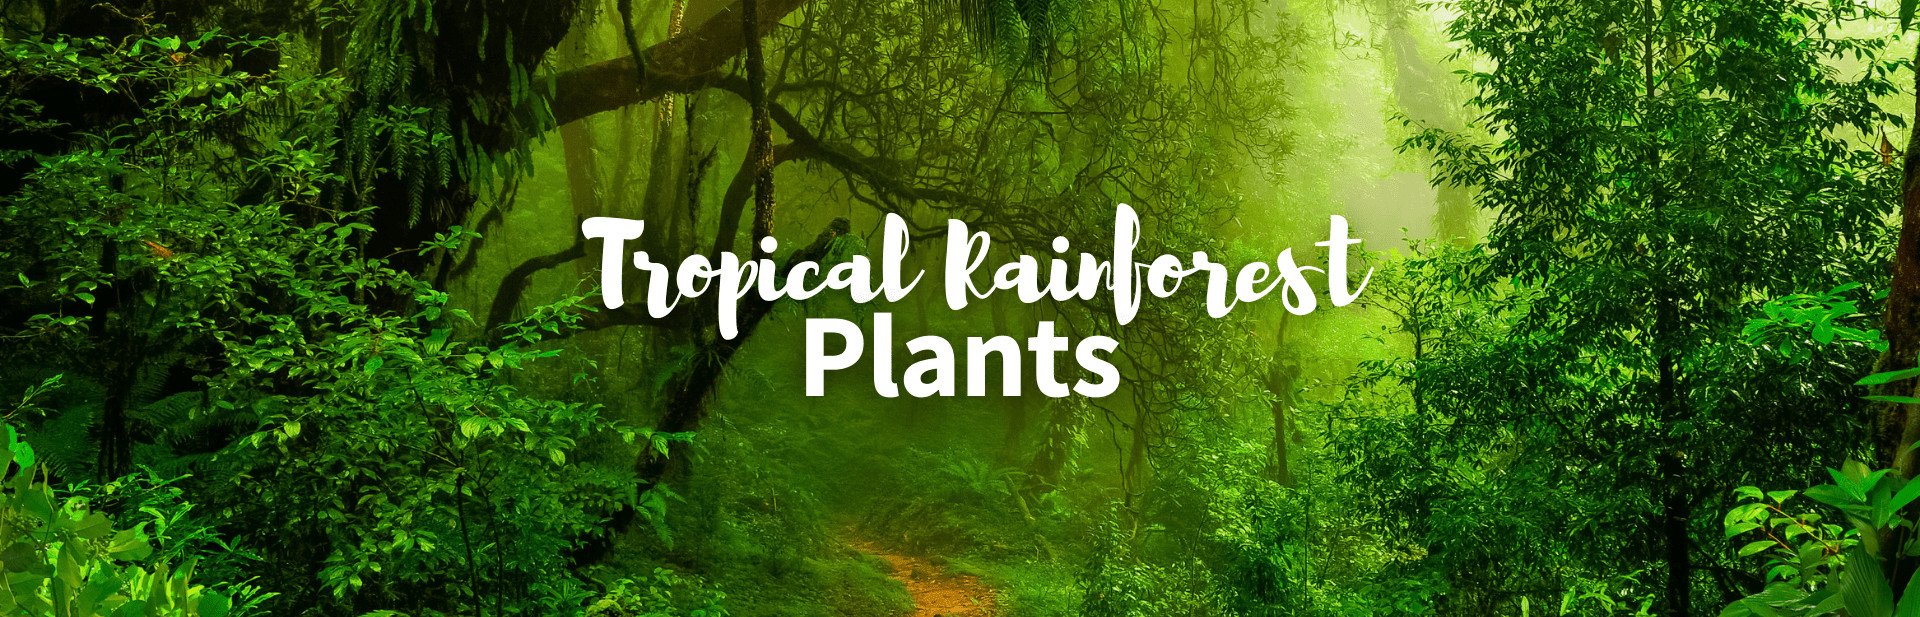 25+ Wonderful & Exotic Tropical Rainforest Plants: With Photos and Facts